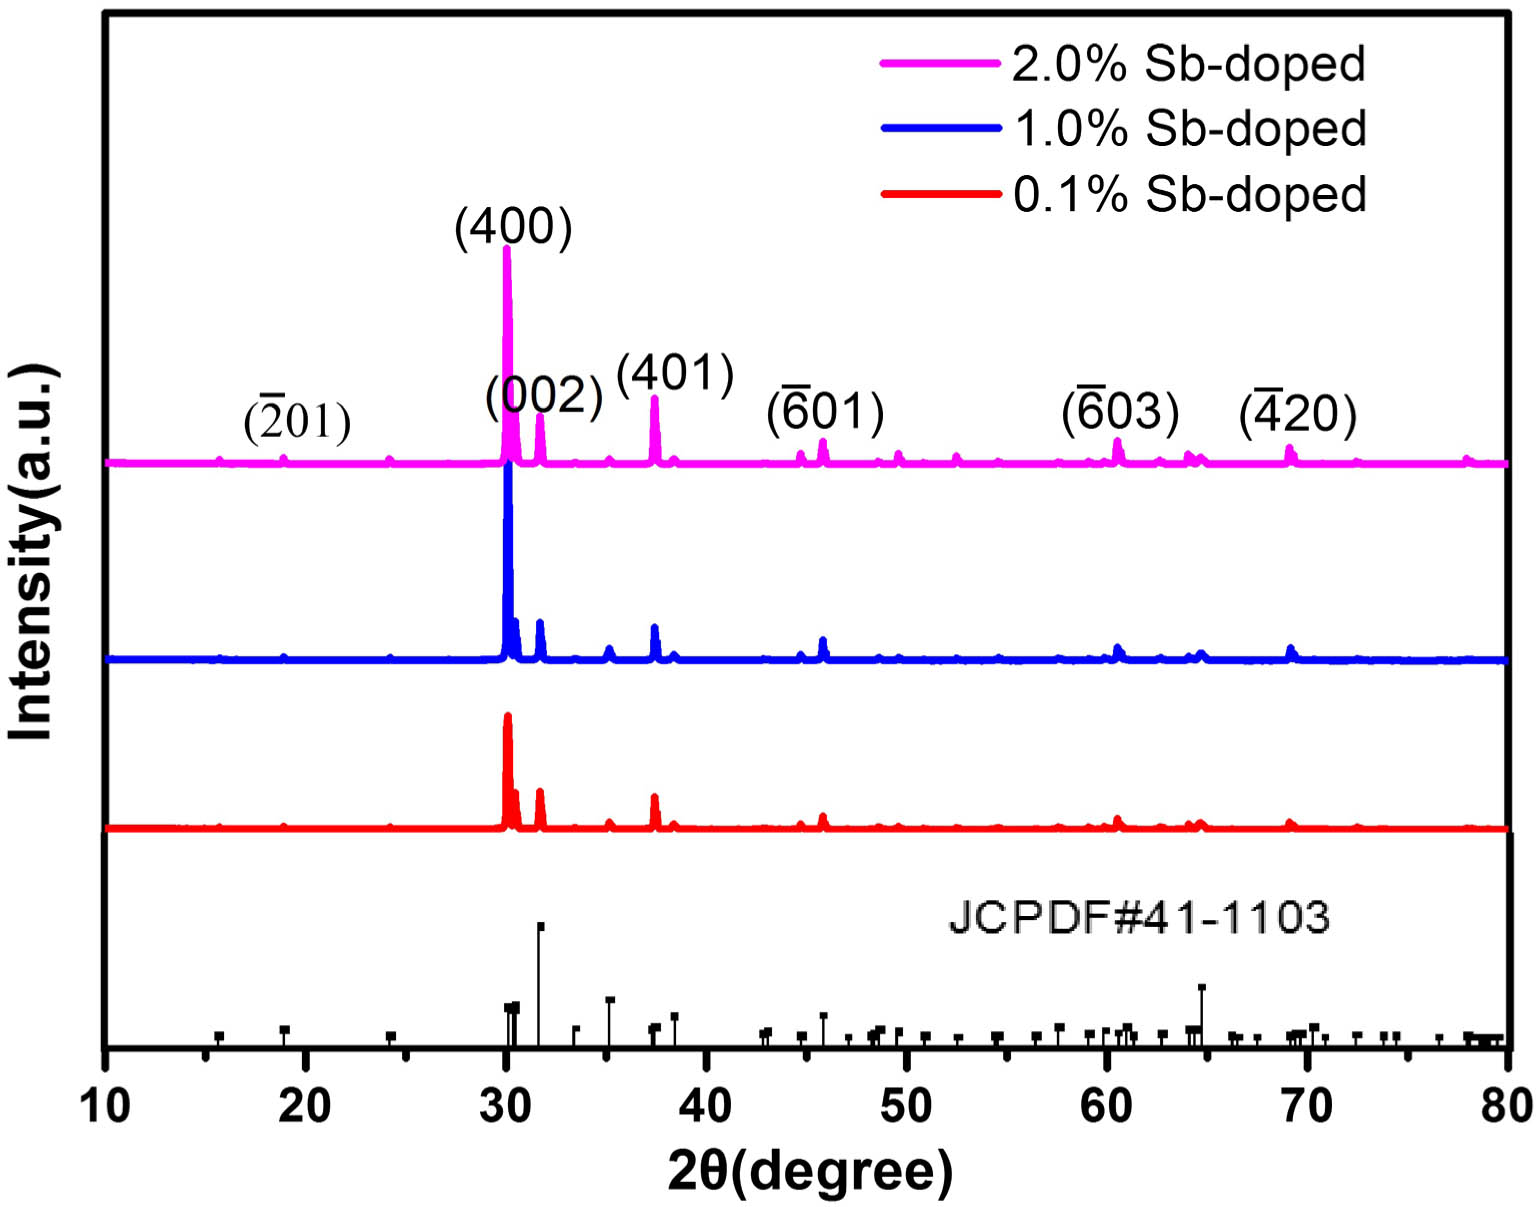 XRD patterns of the database (PDF: 41-1103) and Sb-doped β-Ga2O3 single crystals.